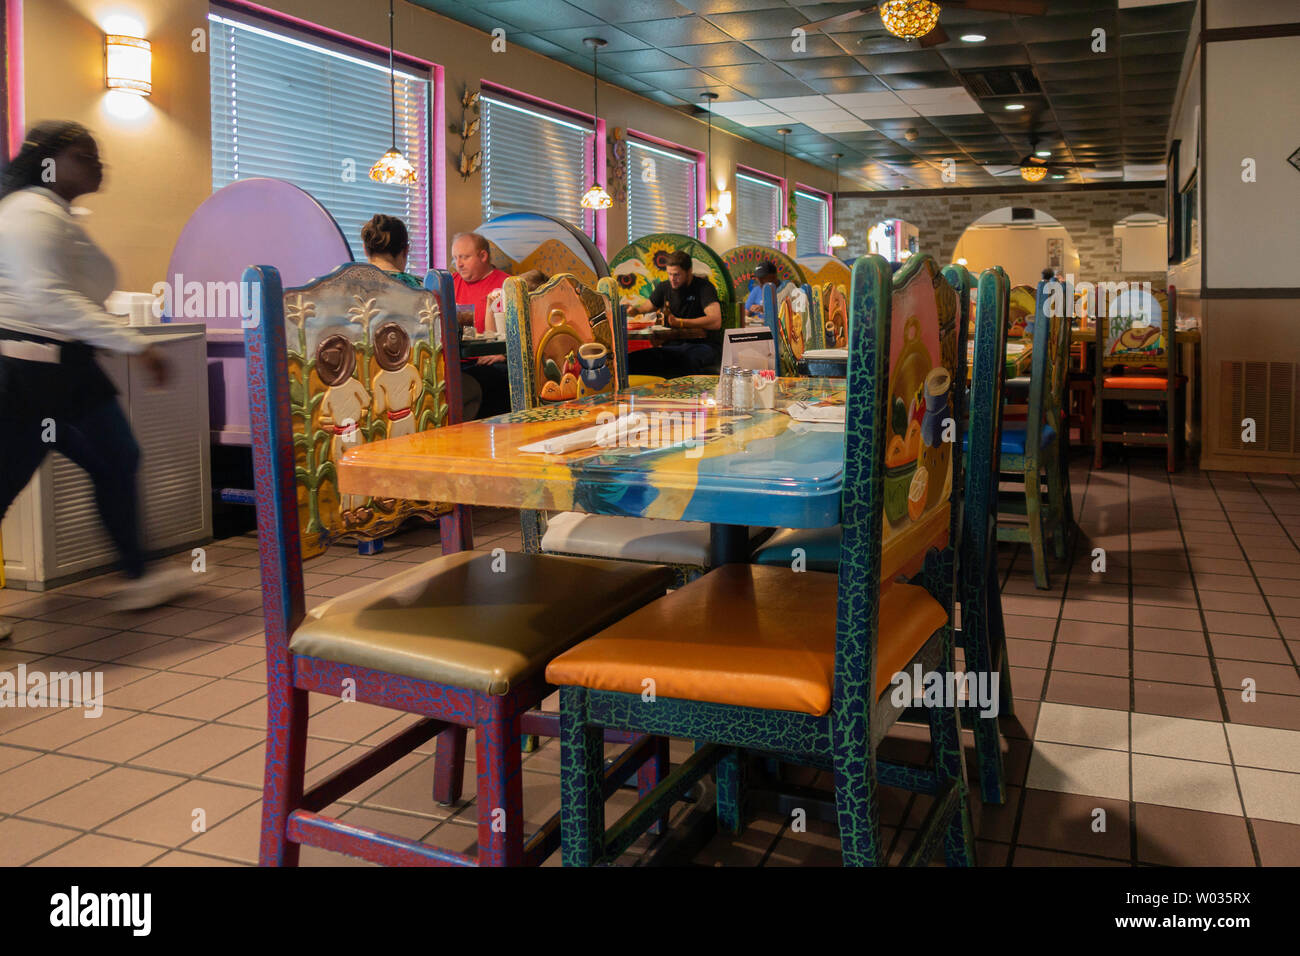 Diners enjoying dinner at a Mexican restaurant with colorful Mexican decor. Arkansas, USA. Stock Photo